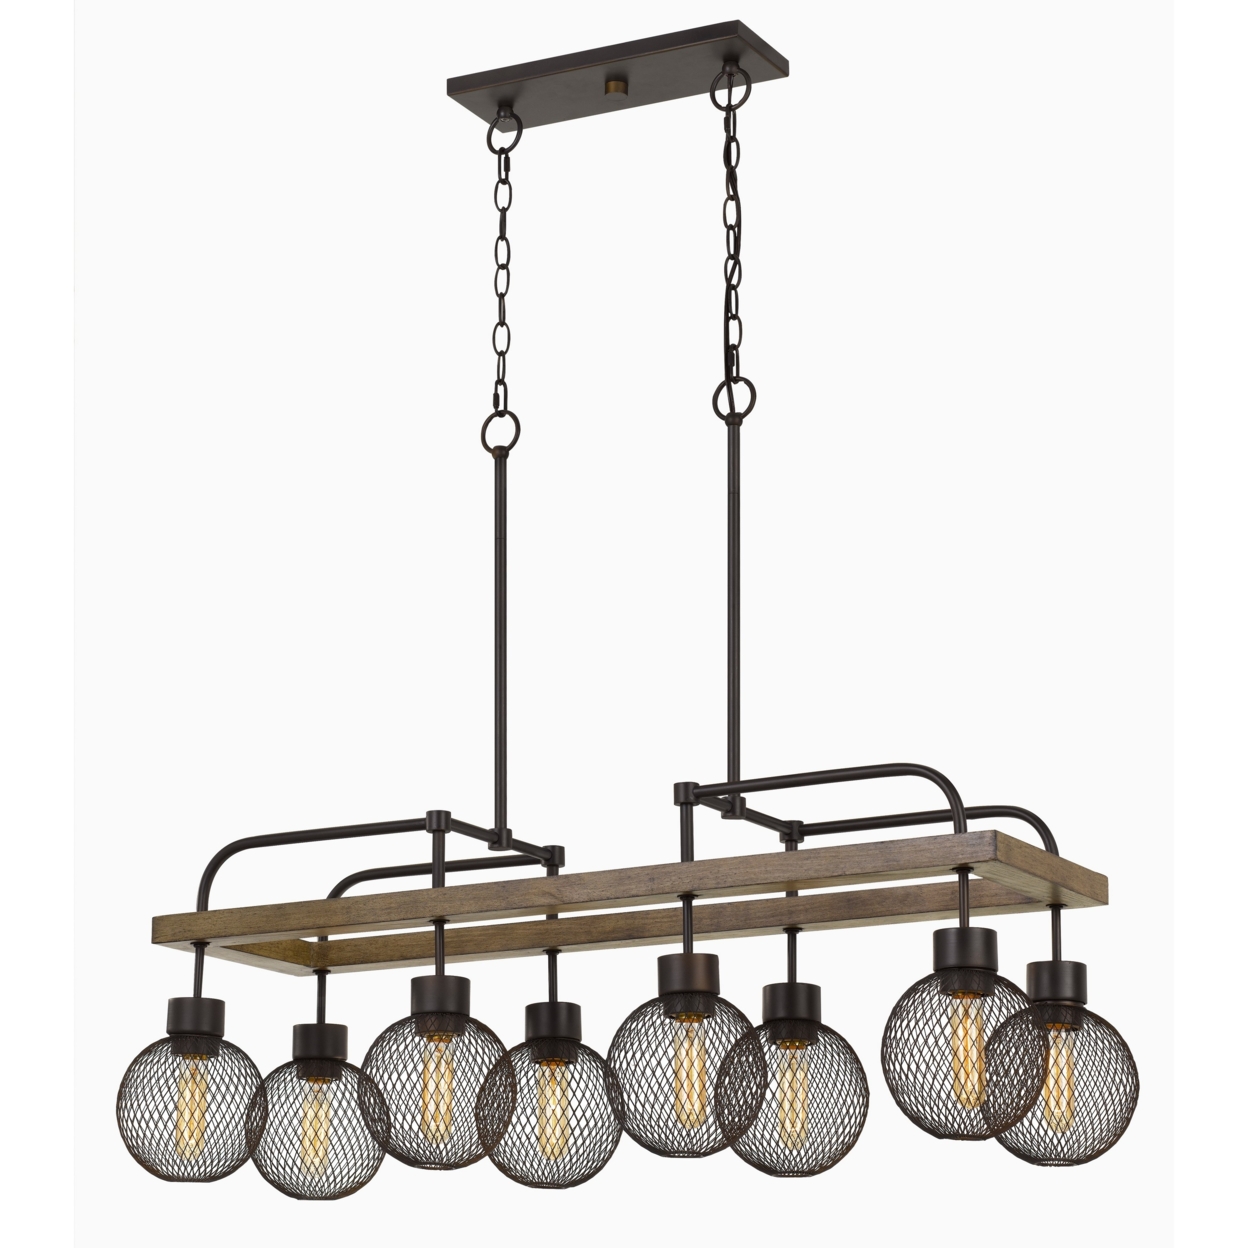 8 Bulb Chandelier With Wooden Frame And Metal Orb Shades, Brown And Black- Saltoro Sherpi